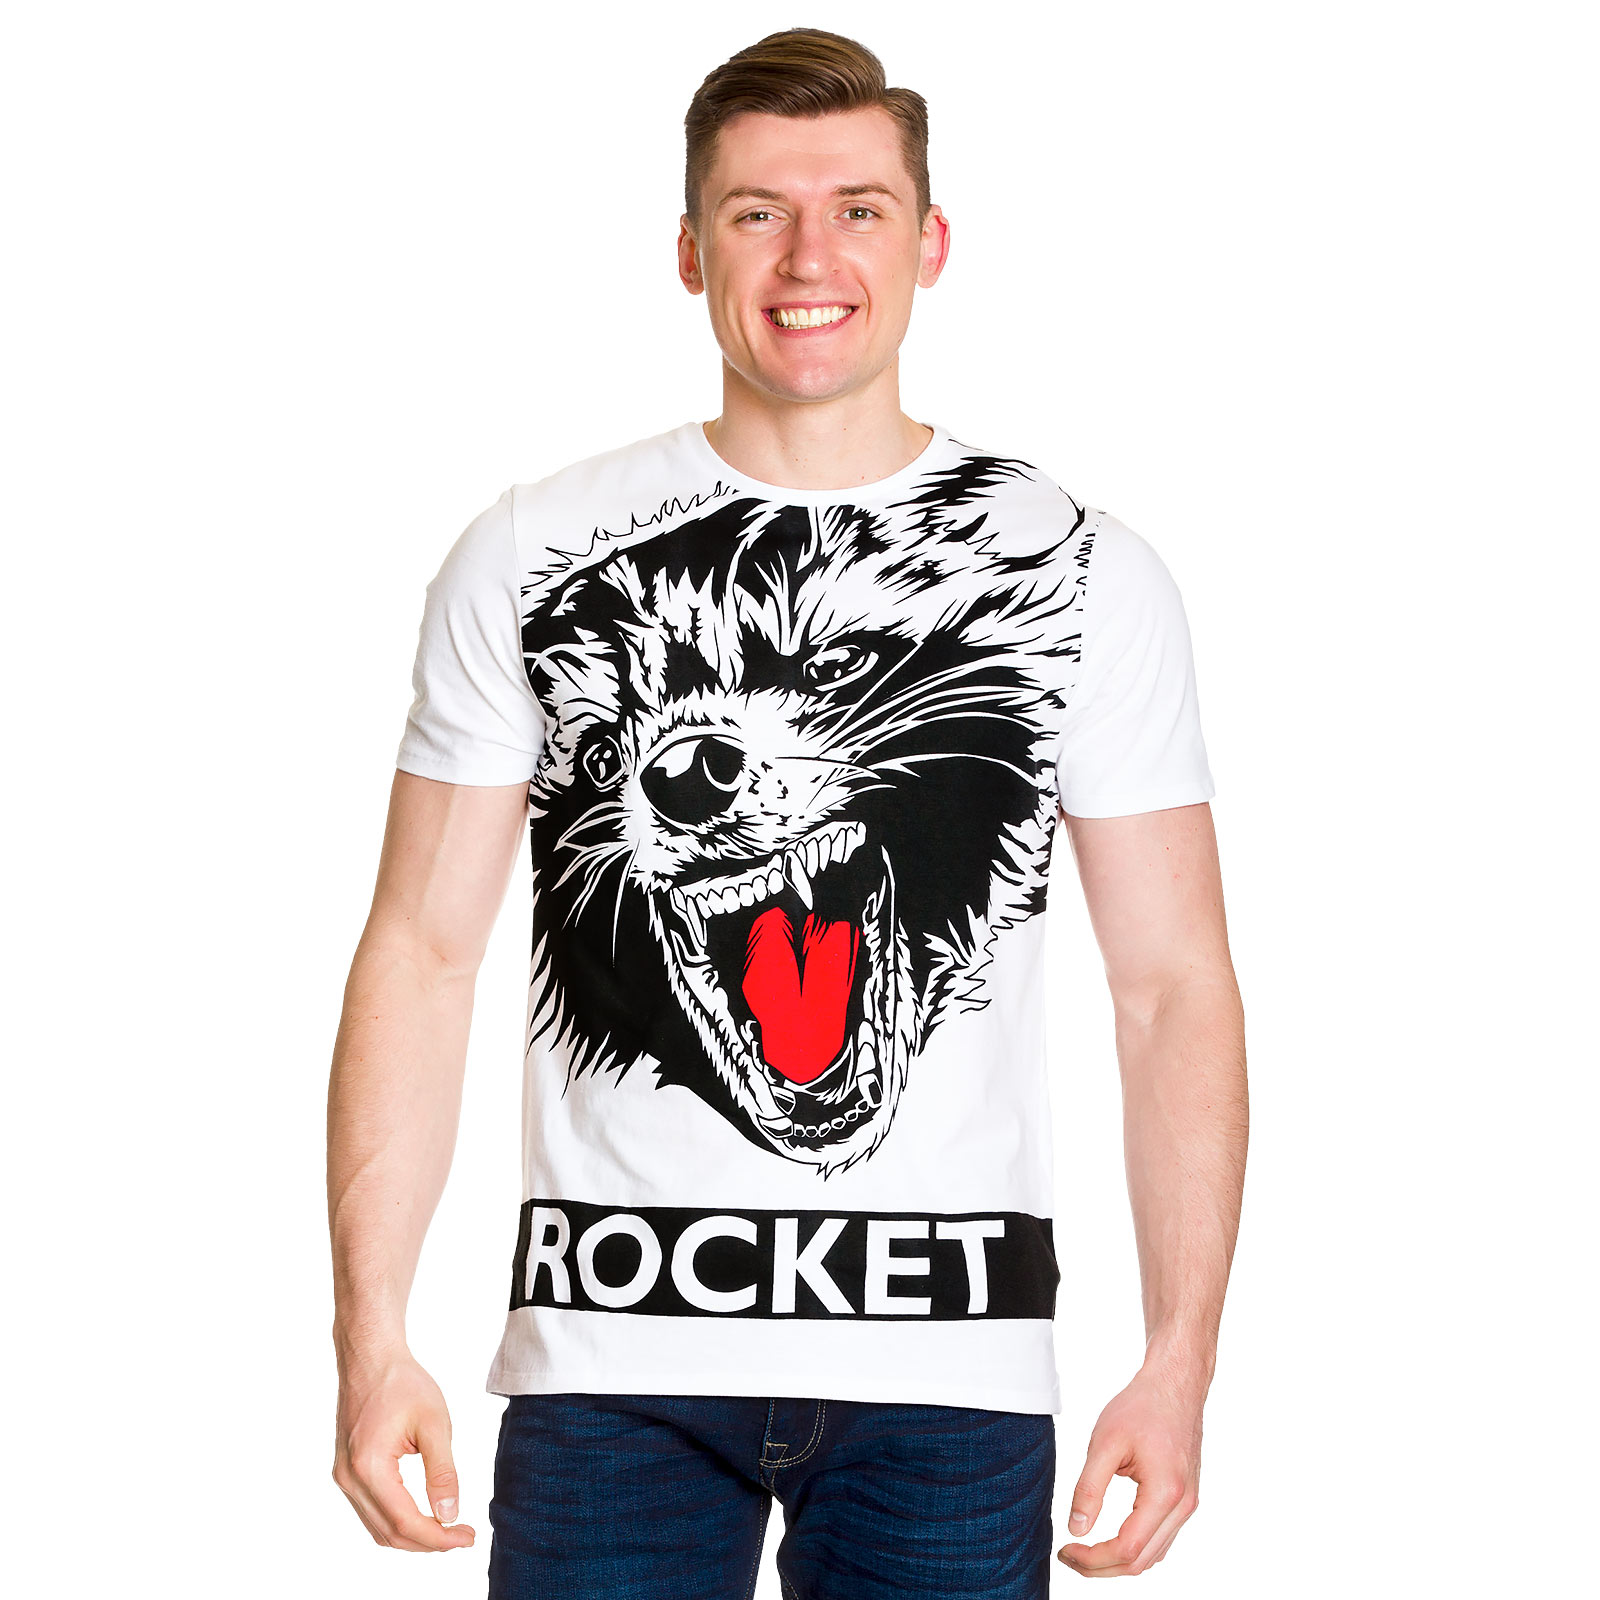 Guardians of the Galaxy - Rocket Full Size T-Shirt white